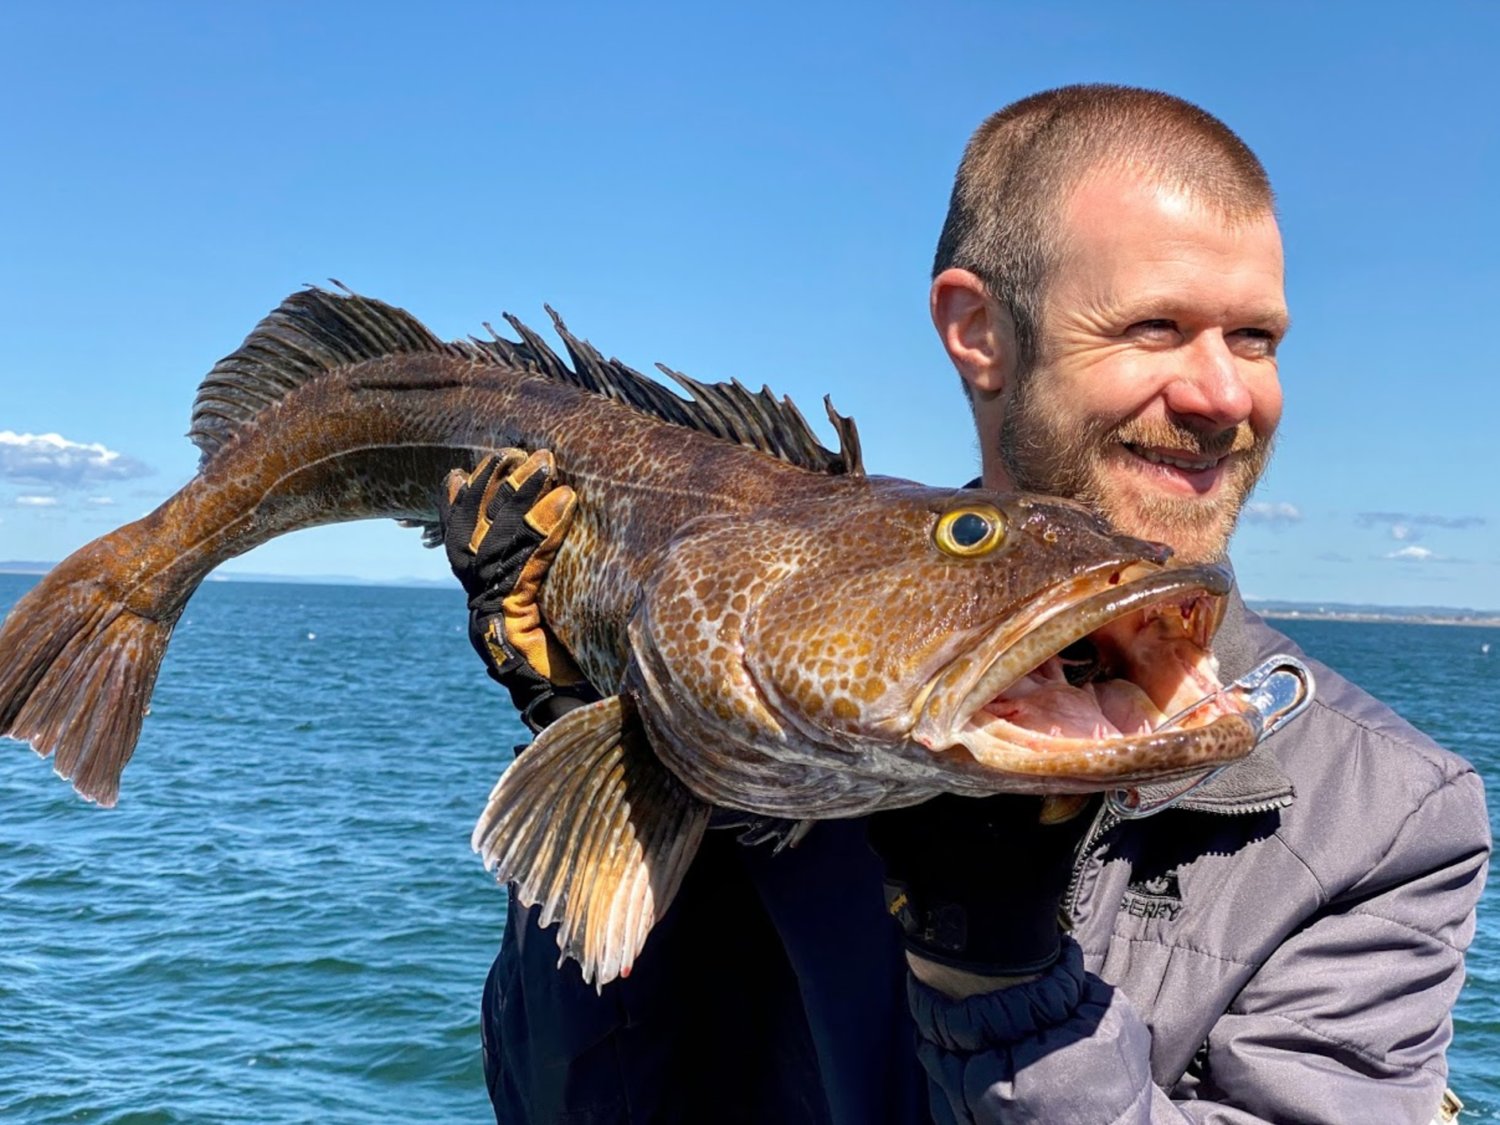 Todd Mittge holds a lingcod he caught 20 miles off the coast of Westport while charter fishing aboard the Tequila Too on Wednesday, June 16, 2021. This was the biggest fish caught that day on the charter boat, weighing in at 16.5 pounds.